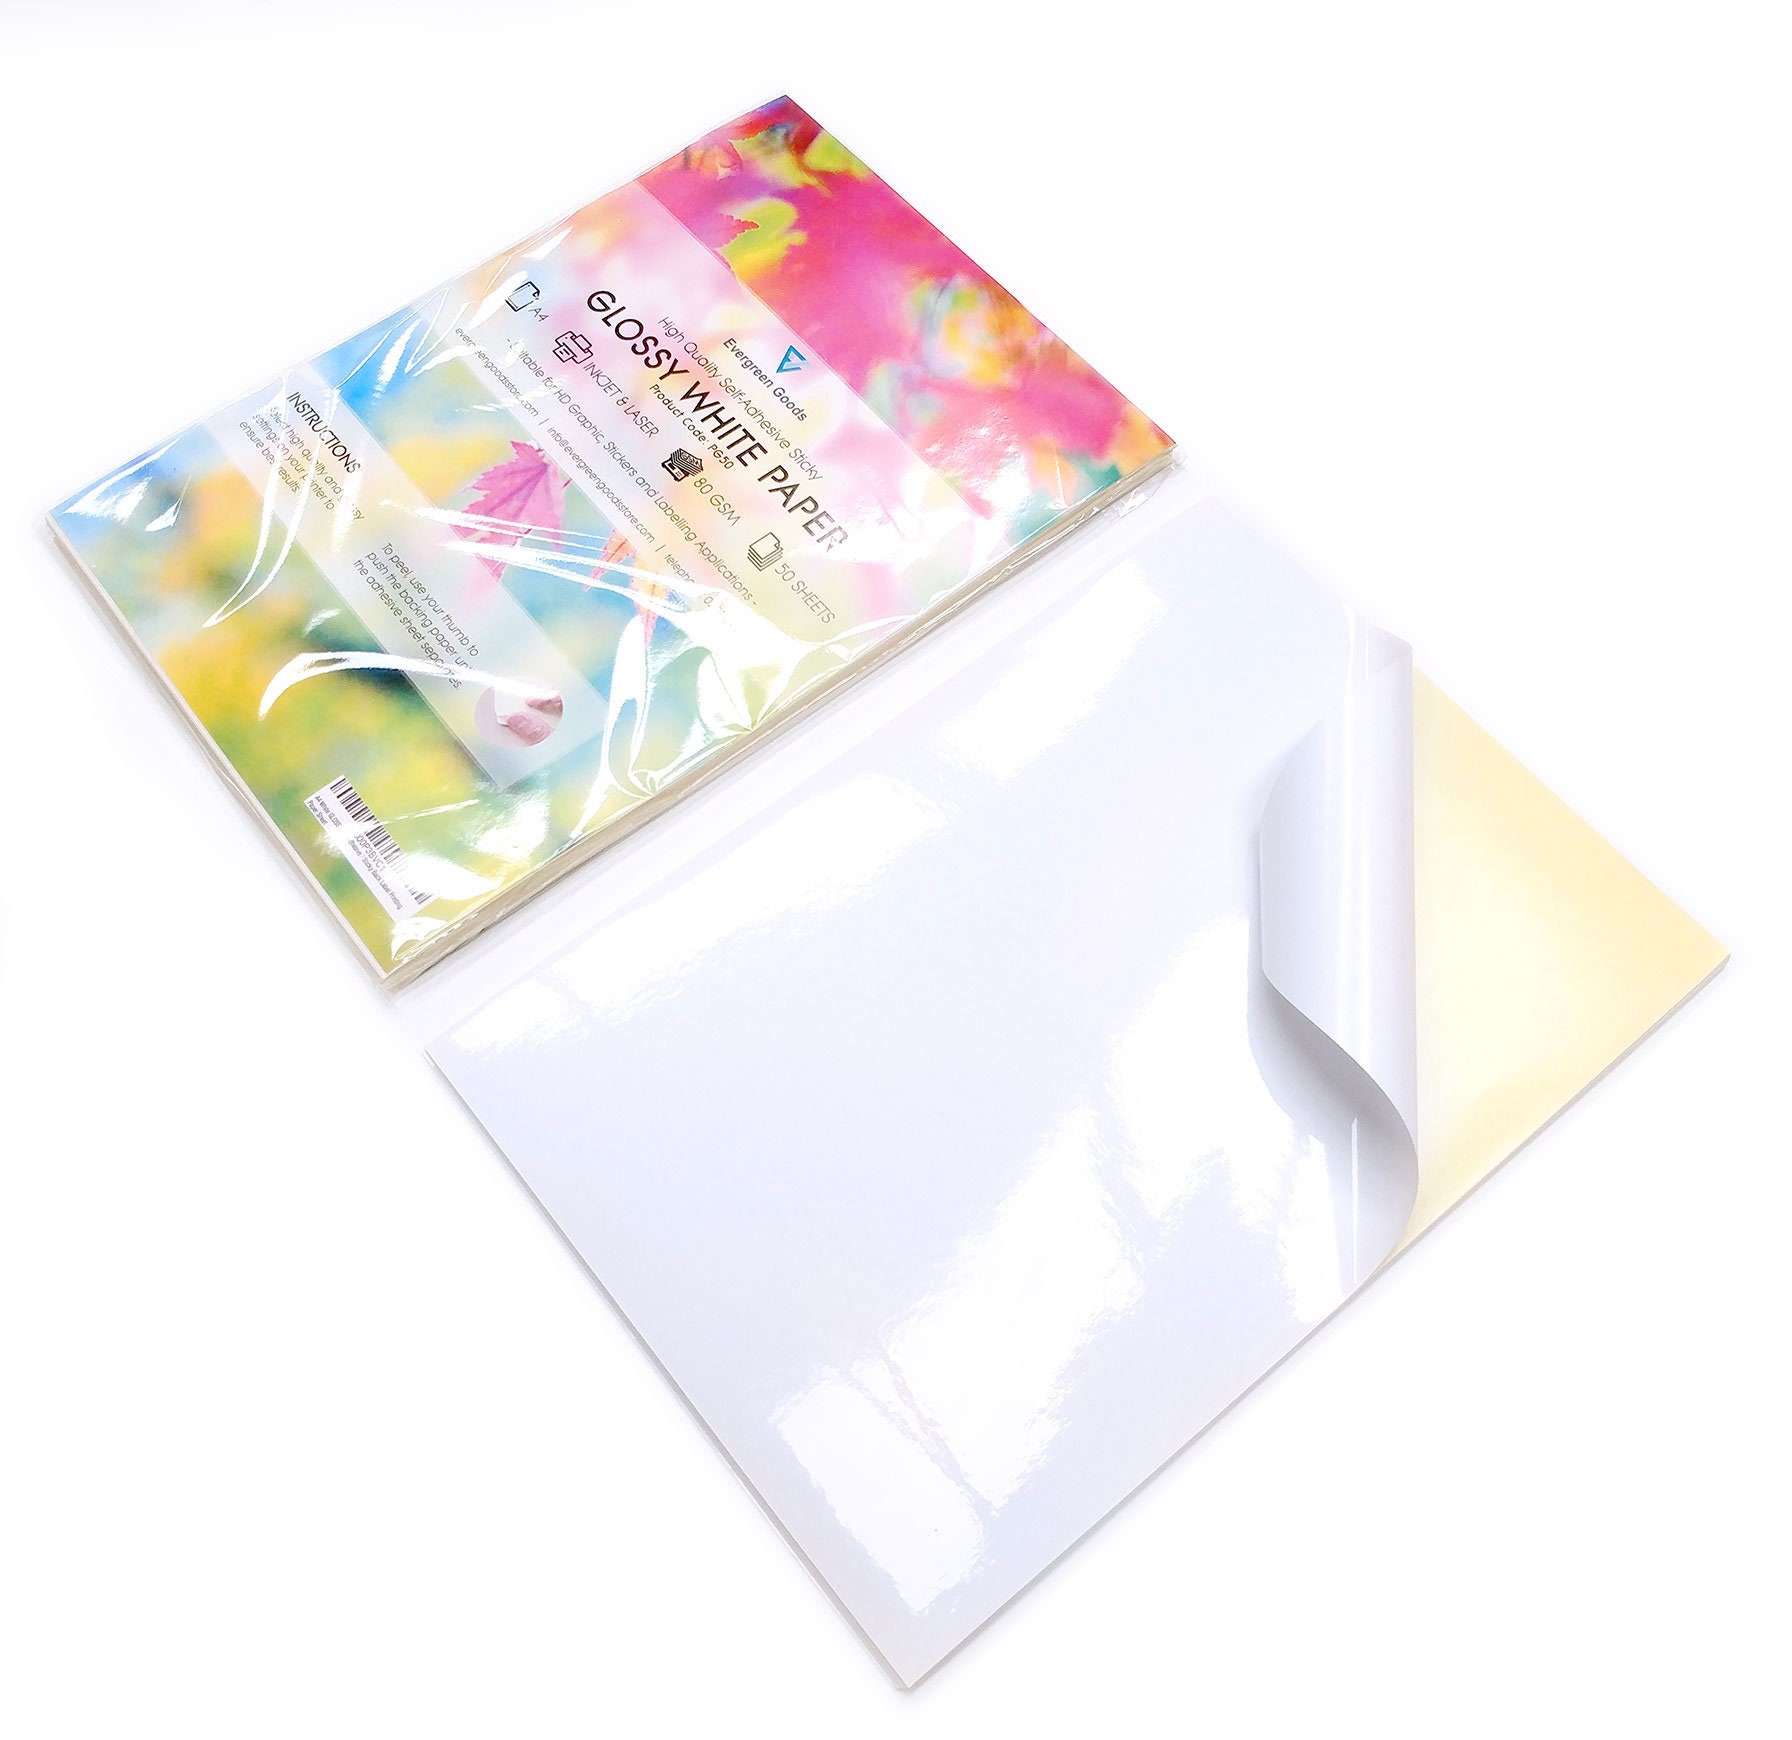 A4 Printable Adhesive Sticker Paper Sheets (Glossy/Matte)